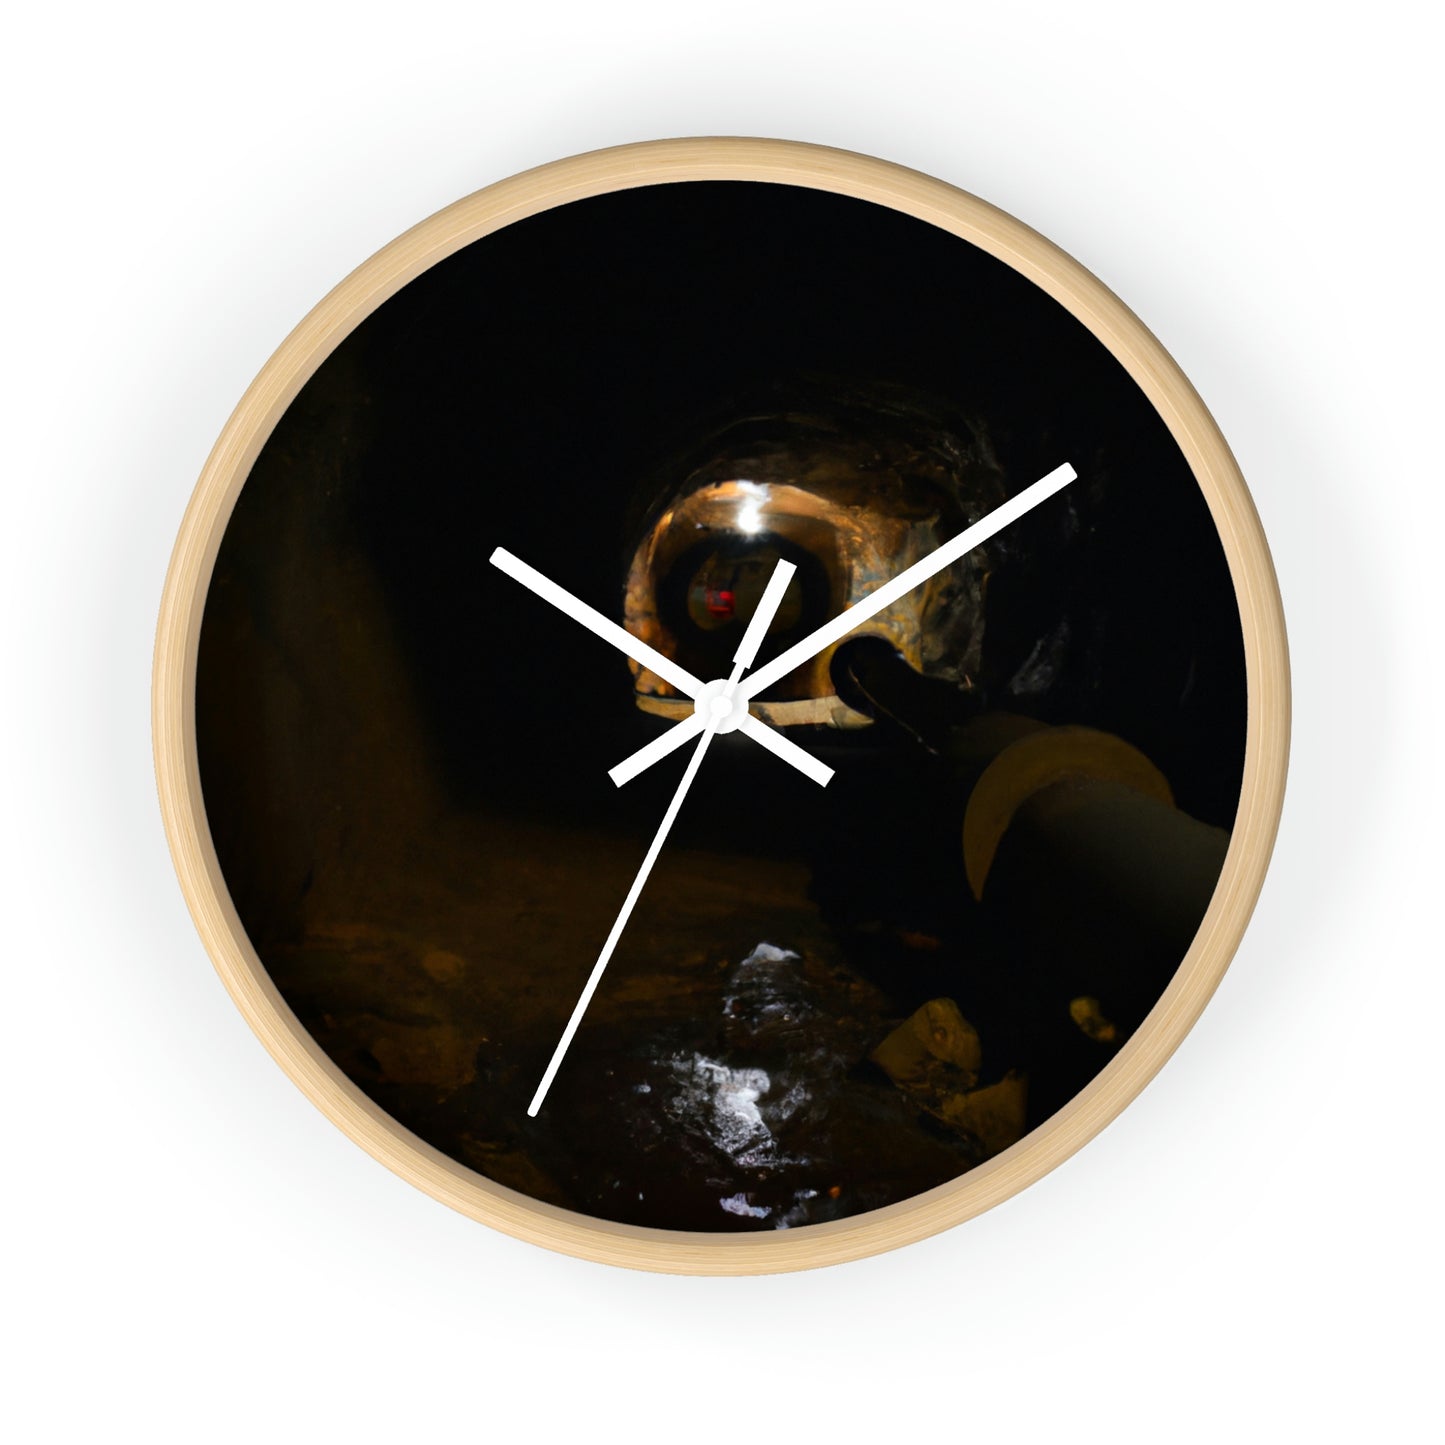 The Mysterious Subterranean Realm - The Alien Wall Clock